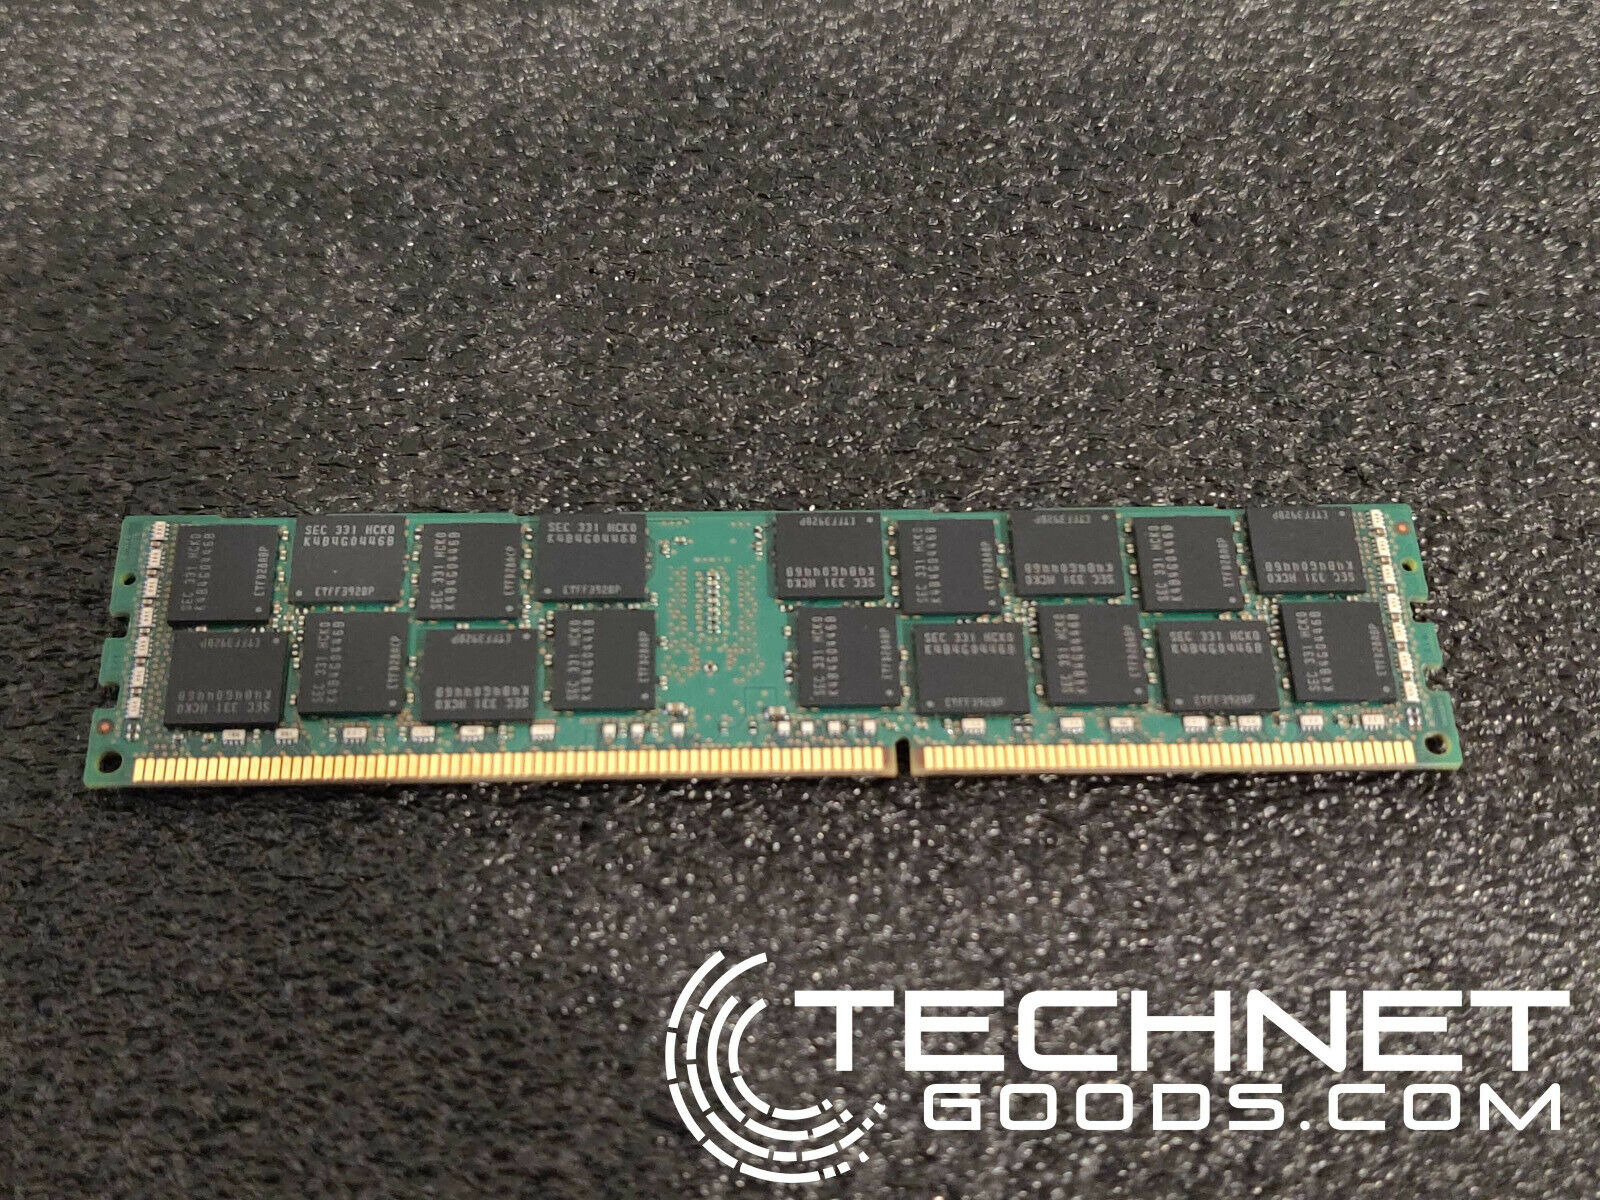 Samsung 1x16GB DDR3 1600Mhz (M393B2G70BH0-CK0Q9) ECC Server Memory -TESTED